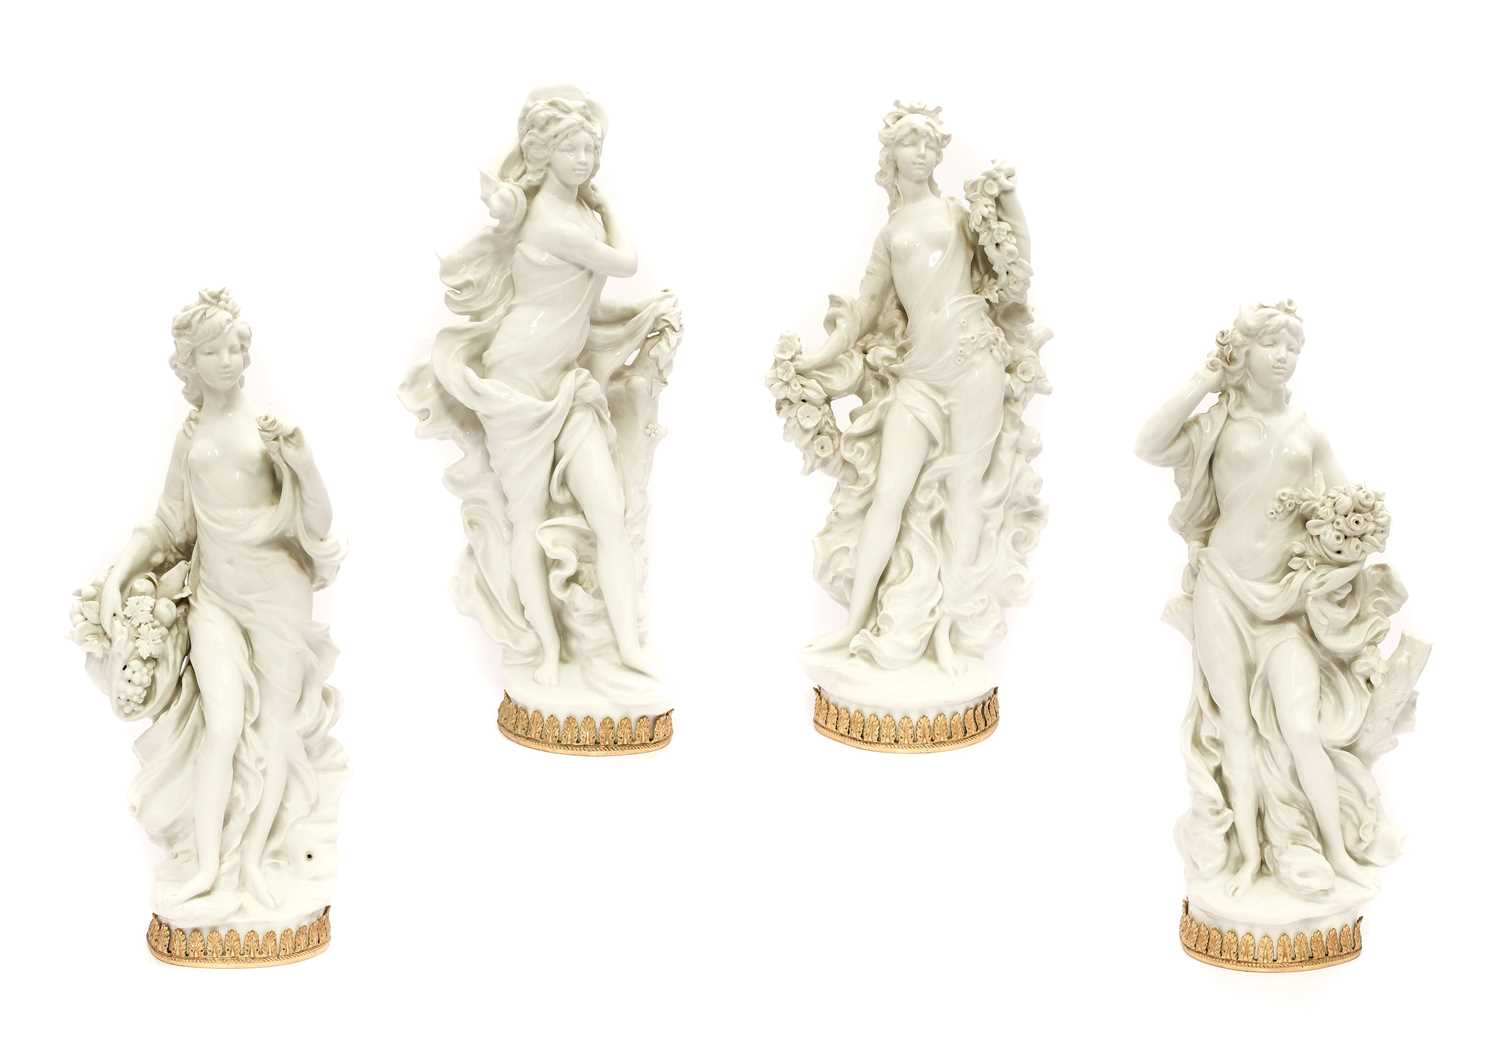 A Set of Four Royal Worcester White Porcelain Figures by Sir Arnold Machin, 20th century, as maidens